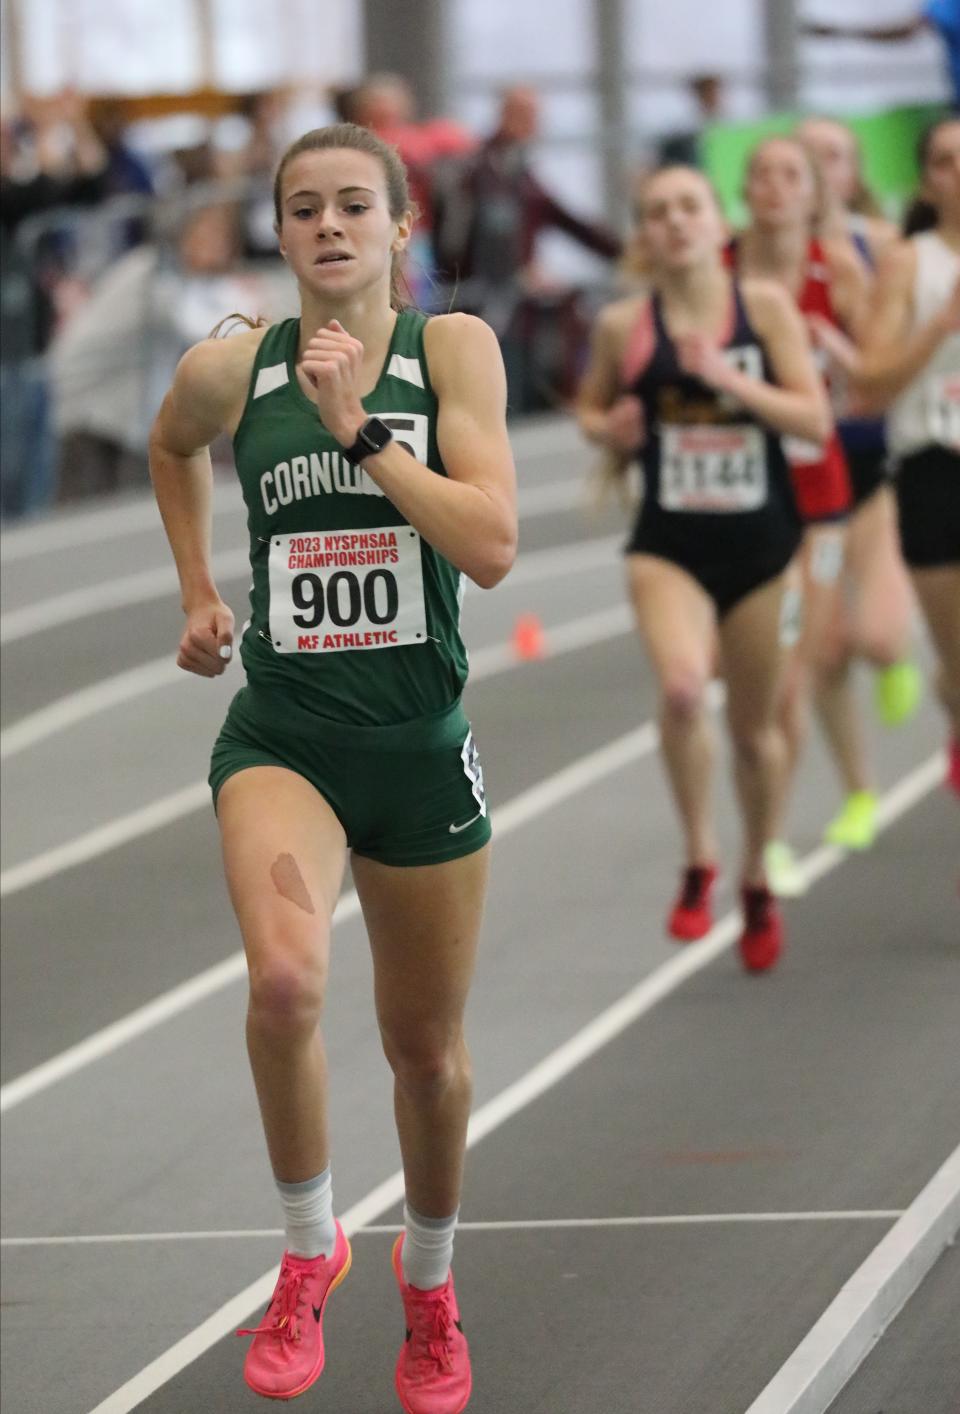 Karrie Baloga from Cornwall competes in the girls 3000 meter run during the New York State Indoor Track and Field Championships, at the Ocean Breeze Athletic Complex on Staten Island, March 4, 2023.